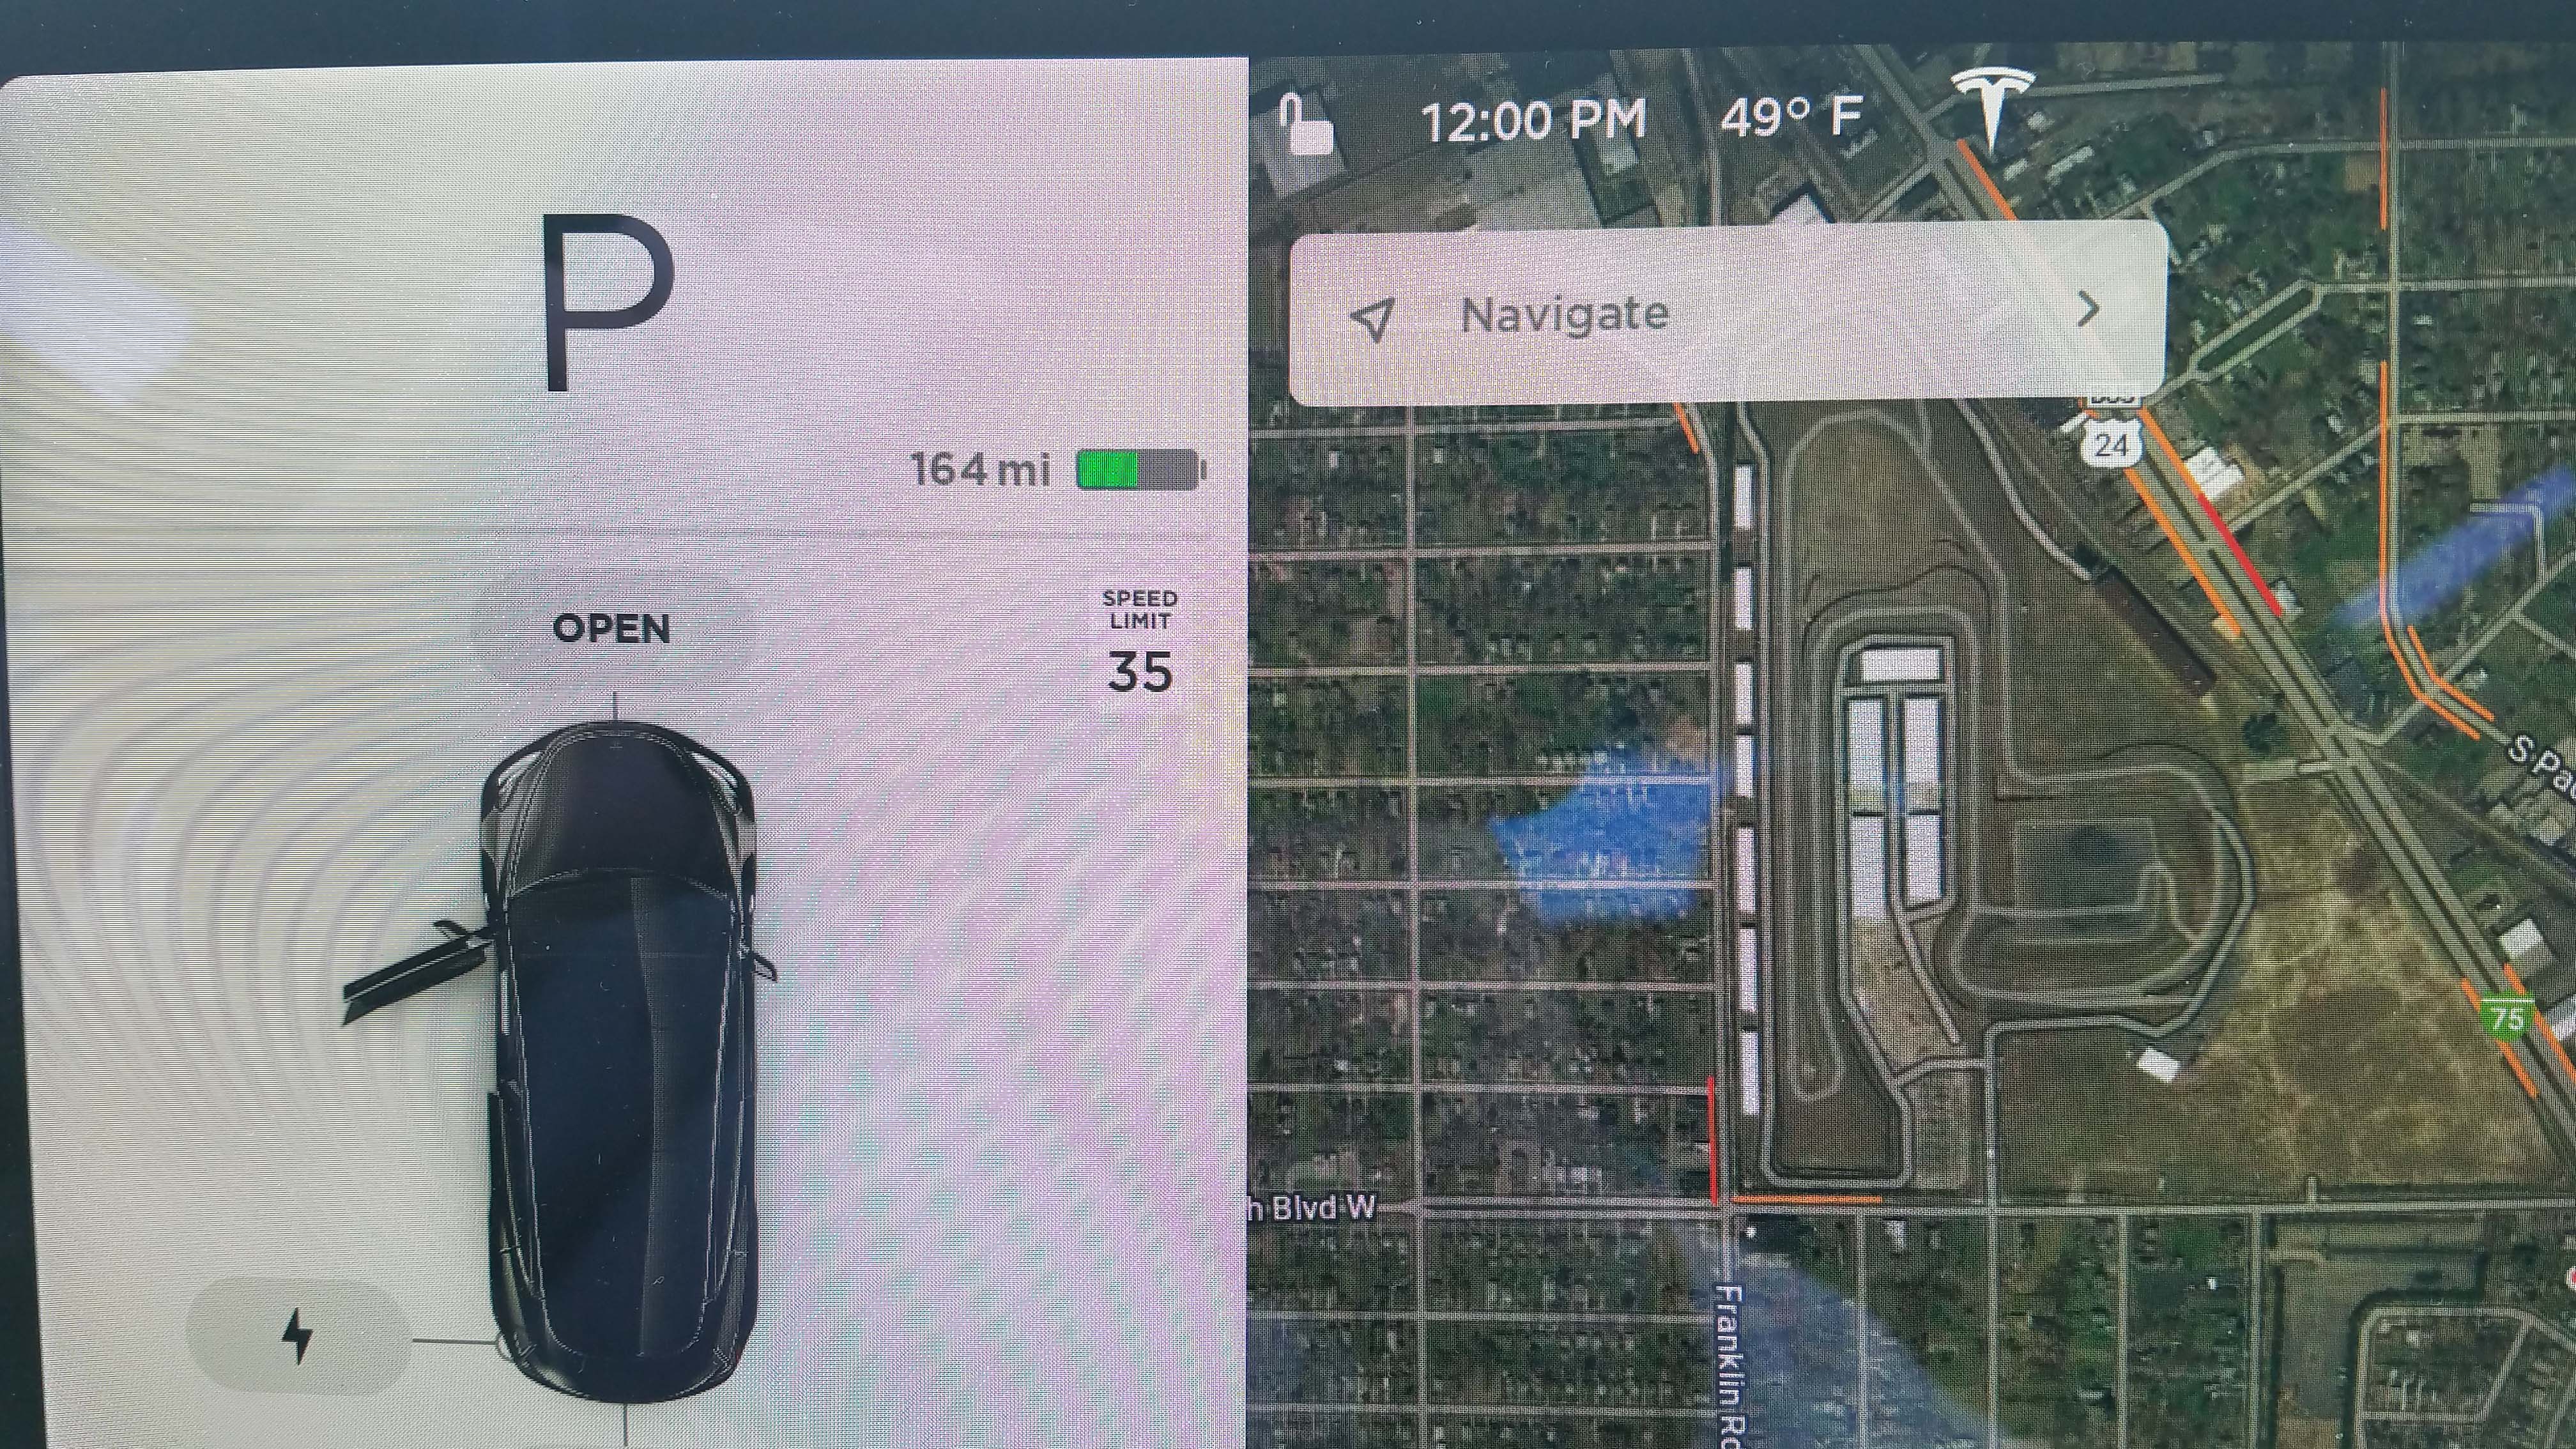 The Tesla Model 3 features a very detailed Google Earth map in the screen.